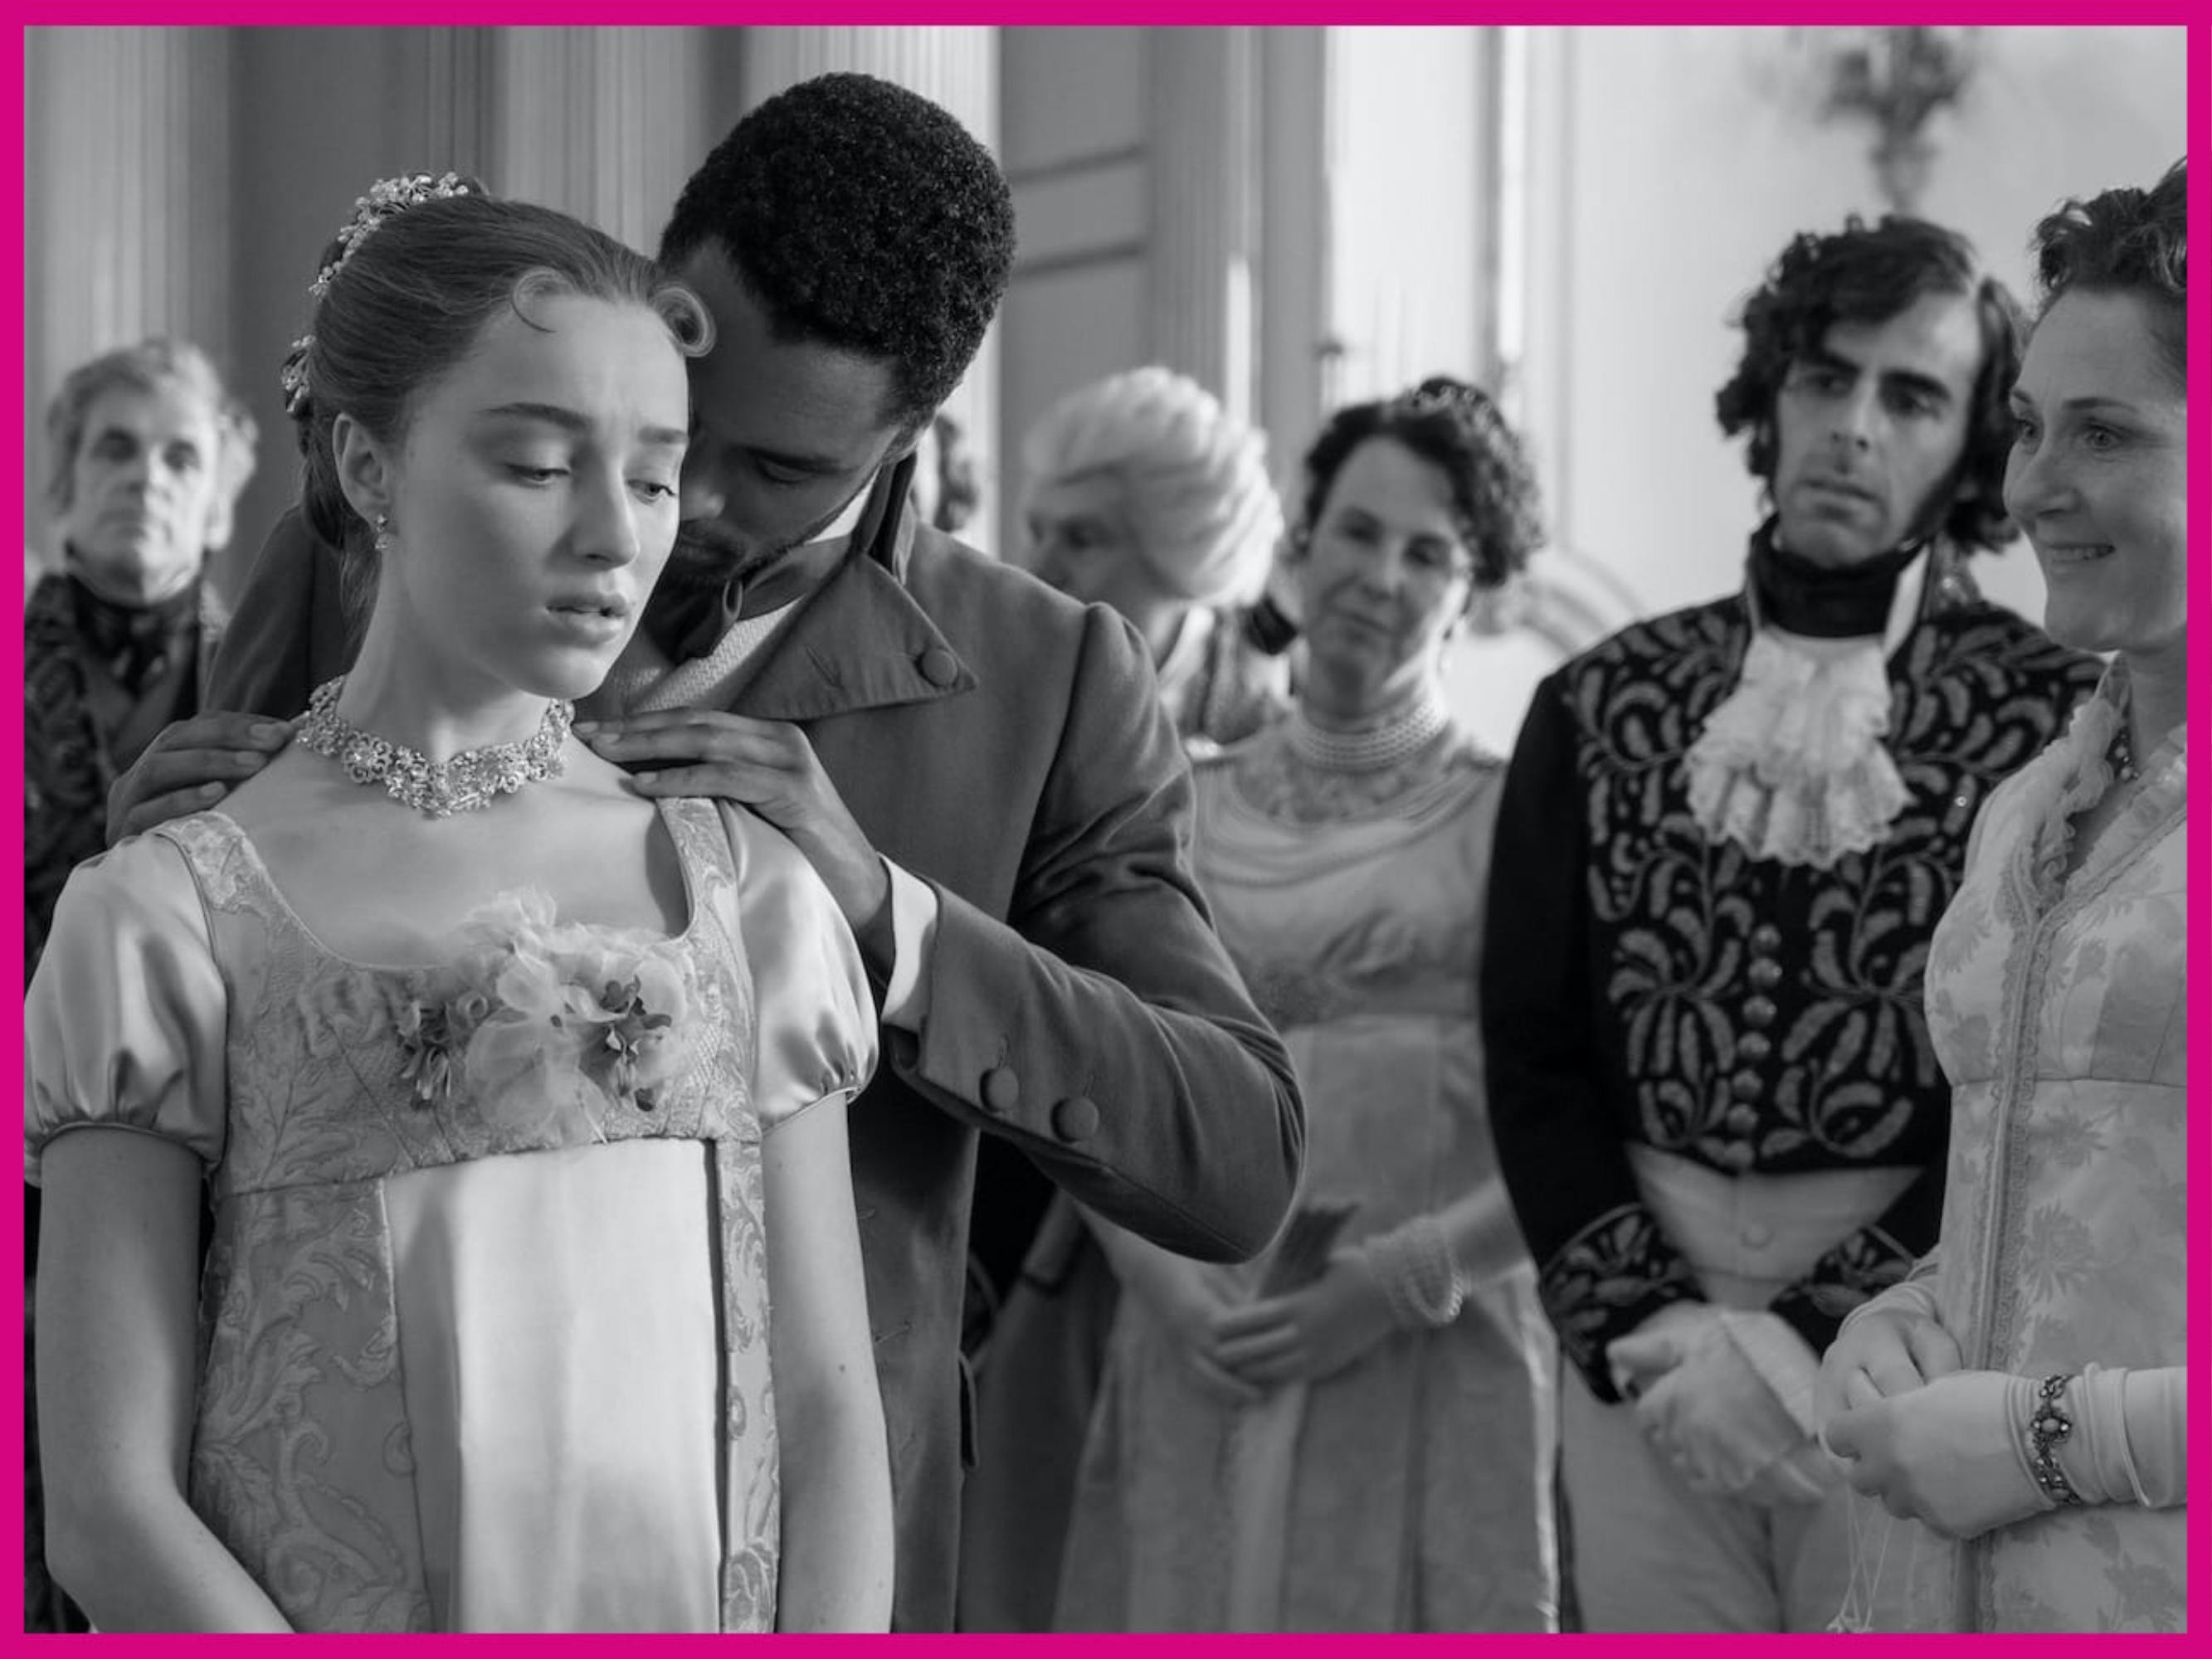 Daphne Bridgerton (Phoebe Dynevor) and Simon Basset (Regé-Jean Page) stand together as Basset clips a necklace around Daphne’s neck. Daphne wears a light blue dress, and Basset wears a brown coat. They are surrounded by family who look on eagerly.